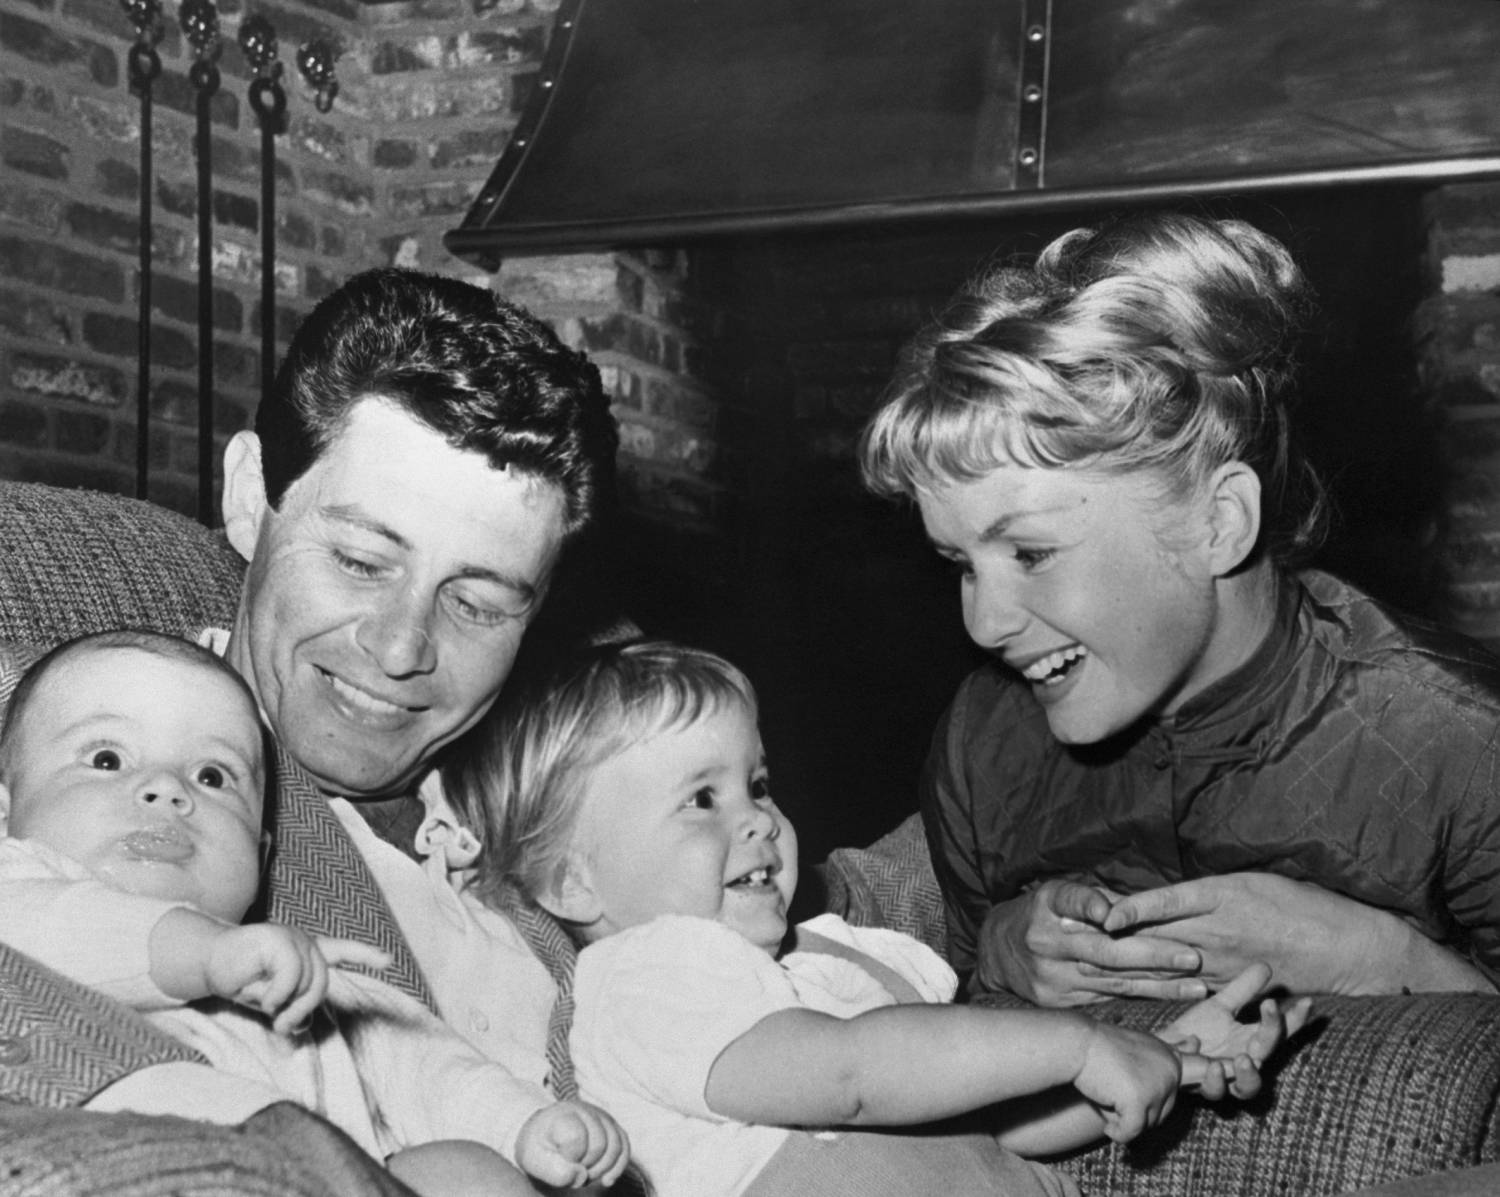 A newcomer to the ranks of fatherhood, Eddie Fisher was named "Father of the Year in TV" by the National Father's Day Committee. Mrs. Fisher (Debbie Reynolds) and the children presented Fisher with a handsome photo wallet containing their pictures. Carrie Frances is 19 months and son Todd (L) is 4 months old.